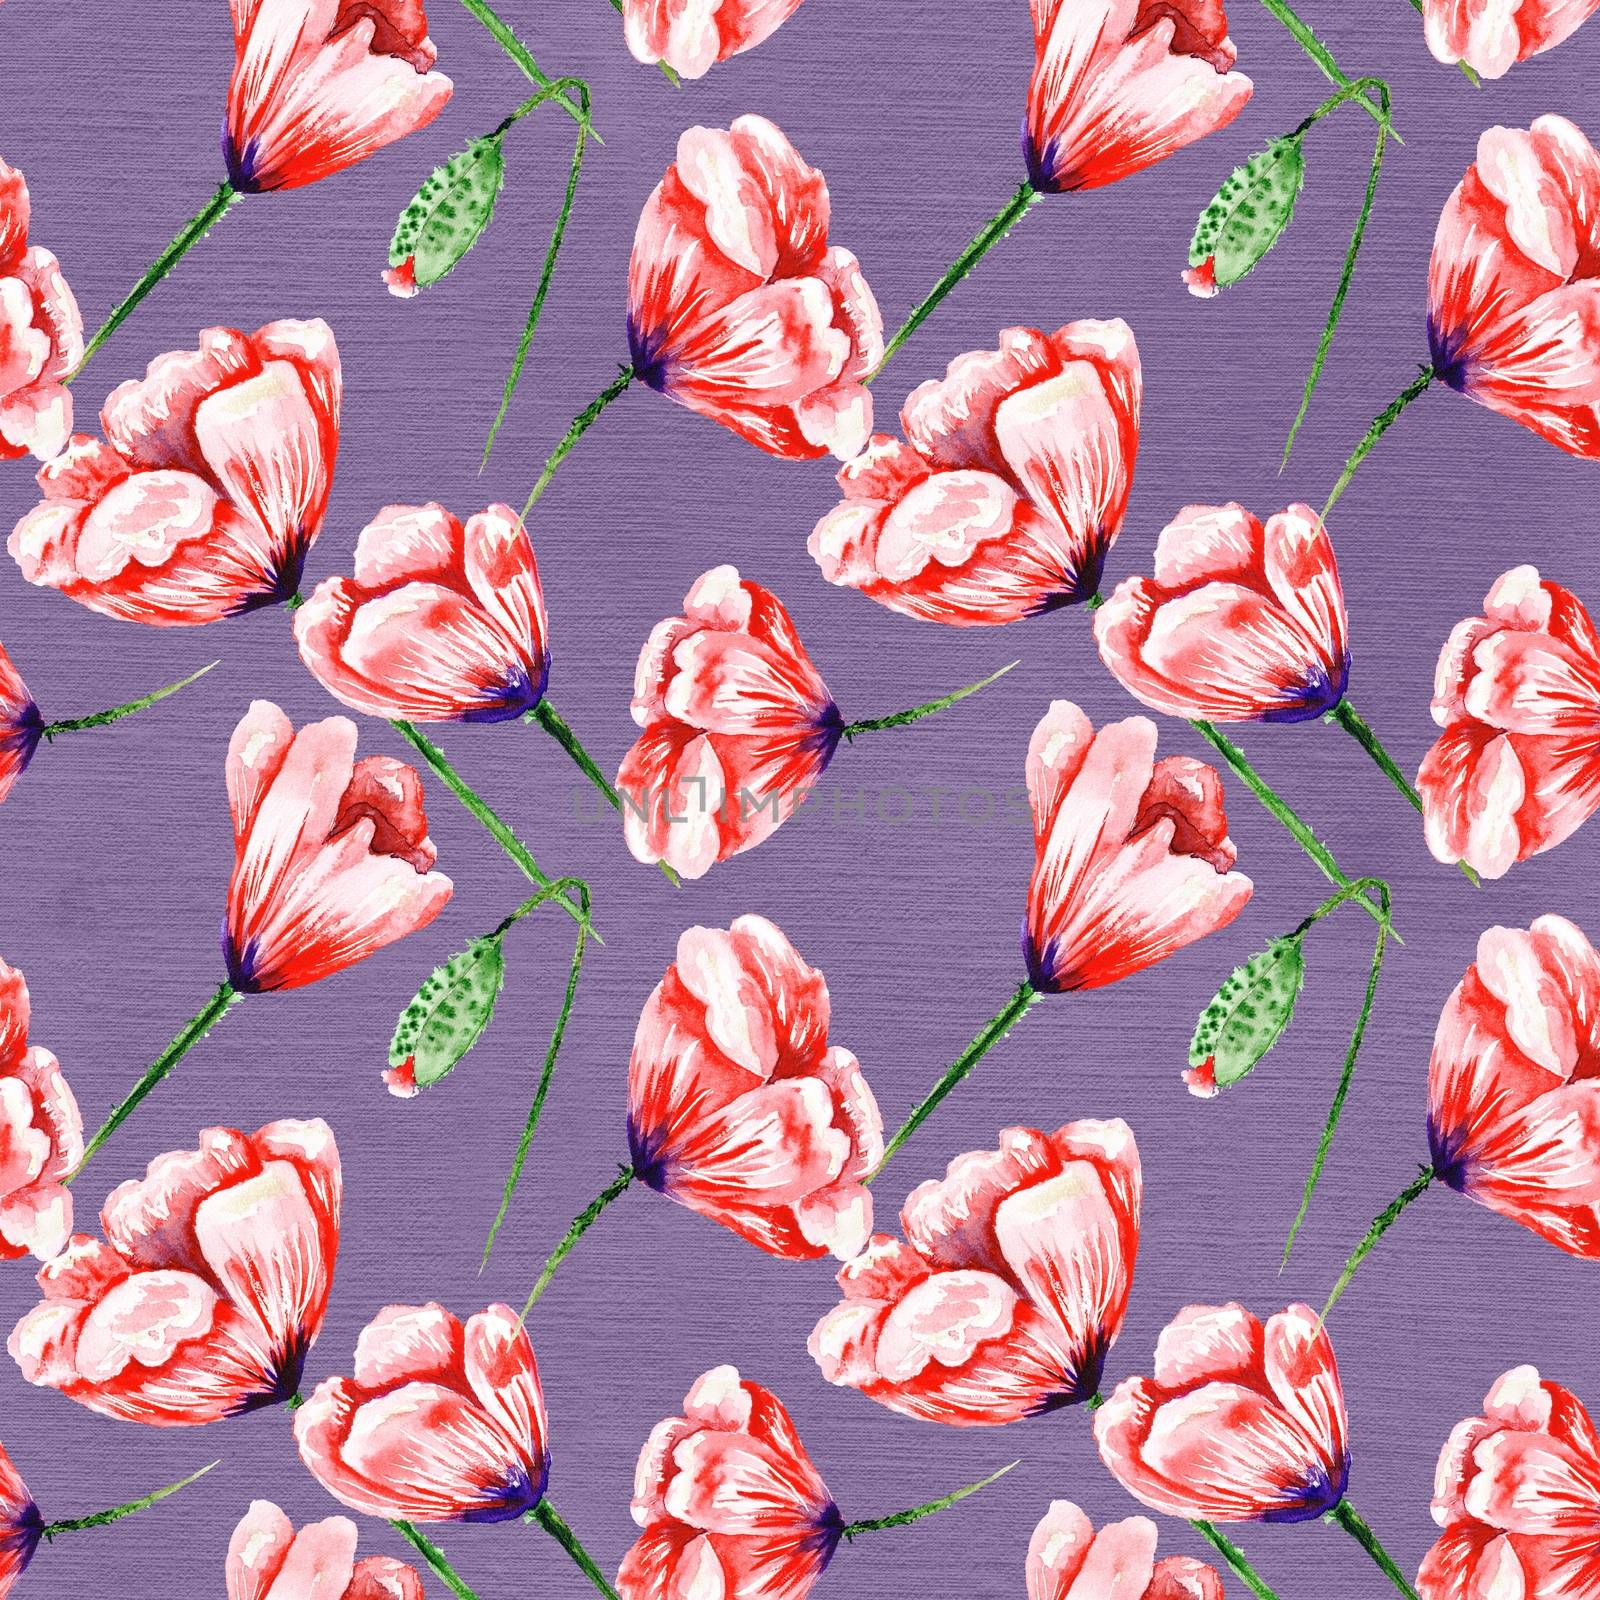  Vintage seamless background for fabric and wallpaper design with red flowers on violet backdrop, romantic and passion style, for bedding and bedrooms